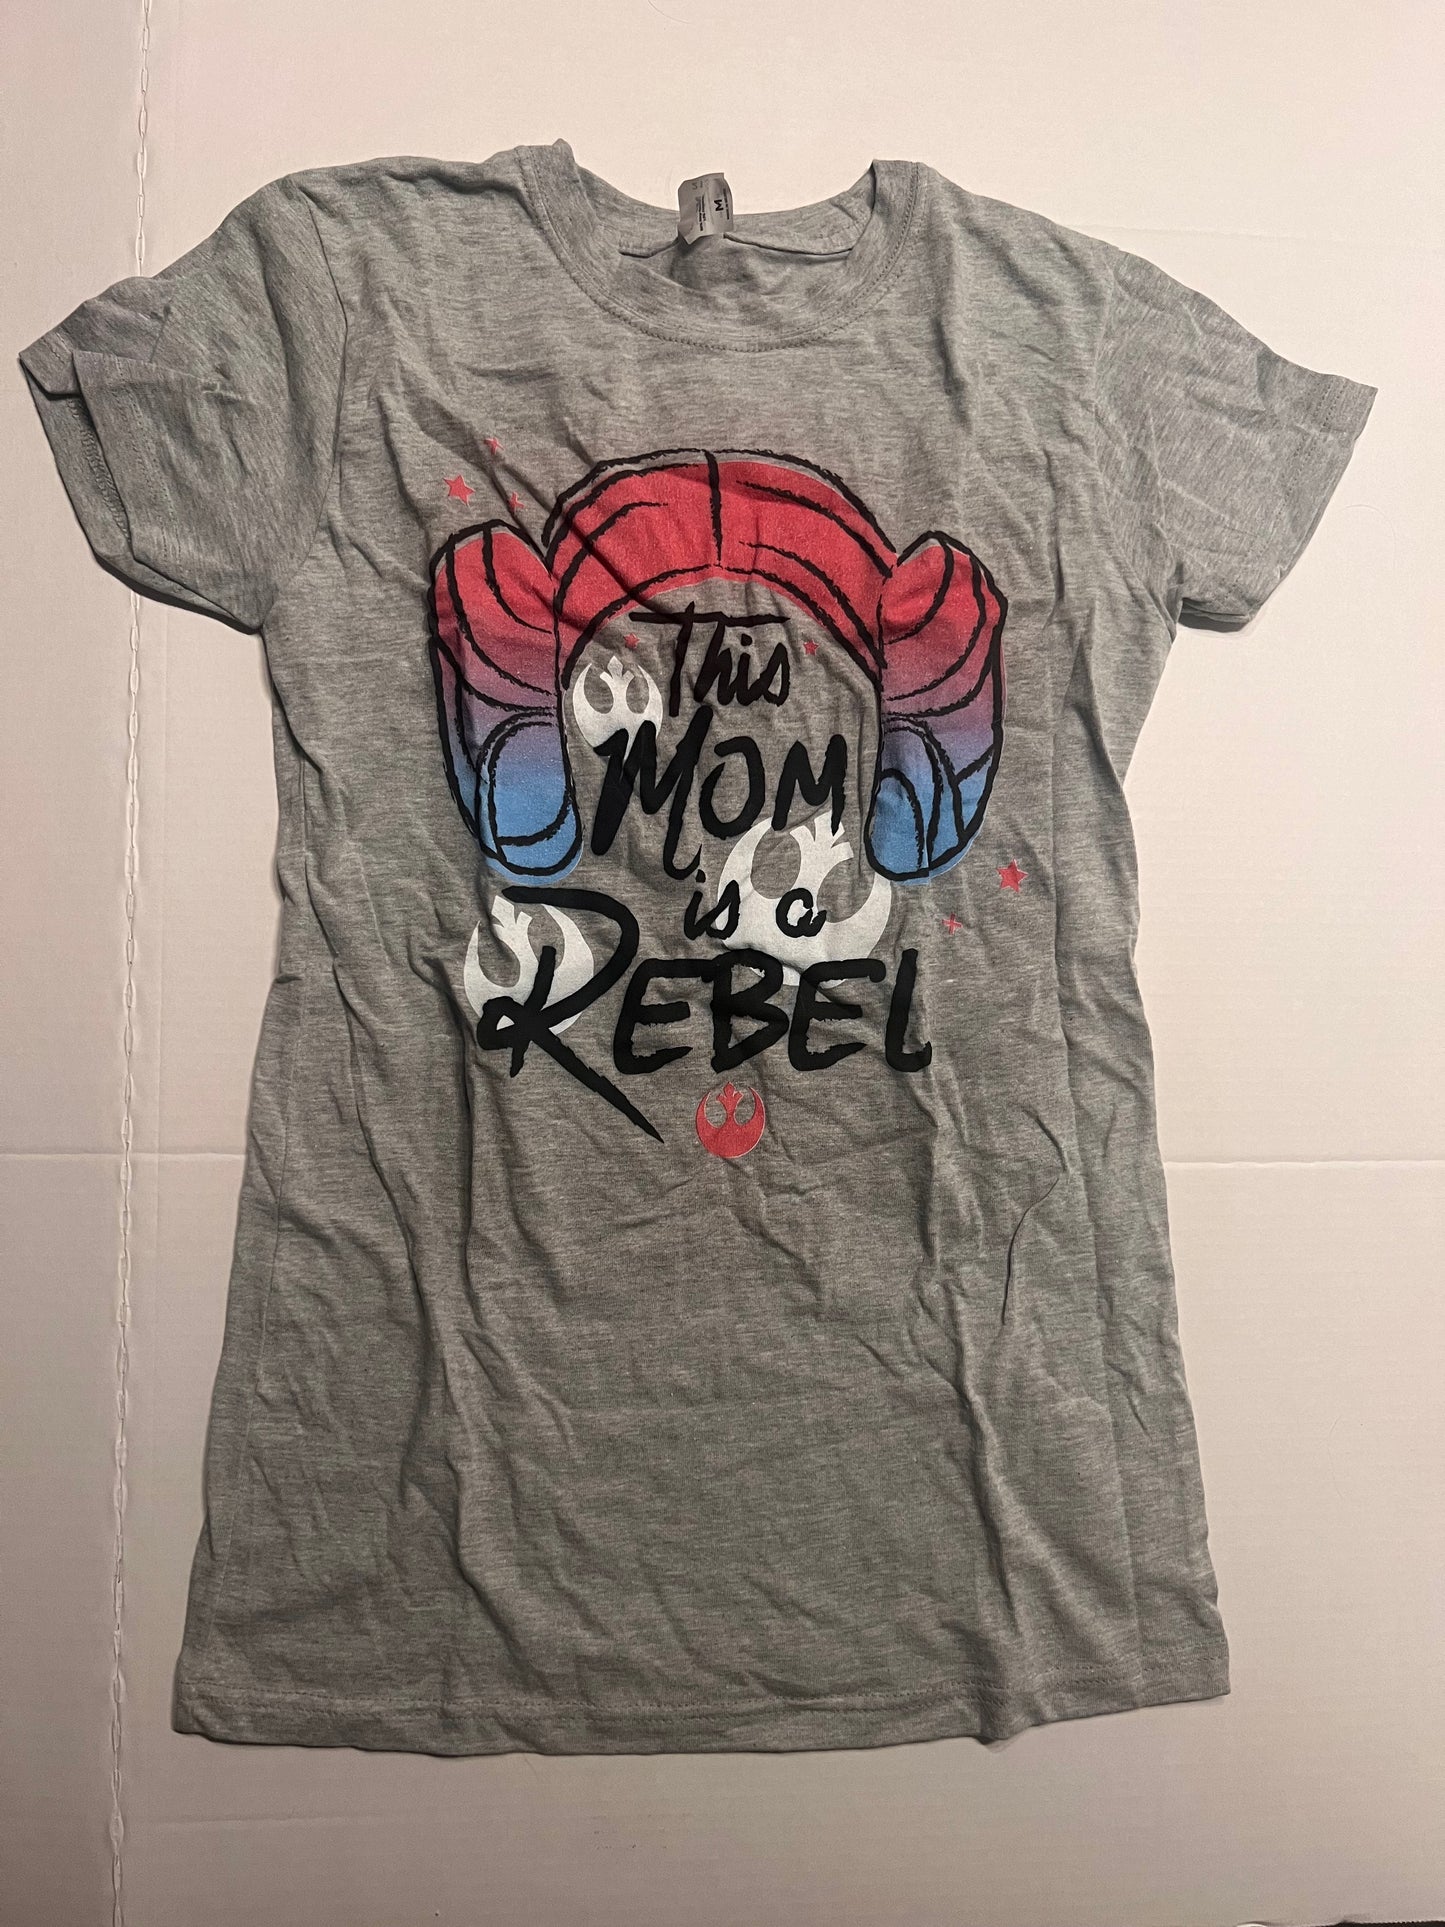 Rebel Mom Star Wars Shirt, New Without Tag